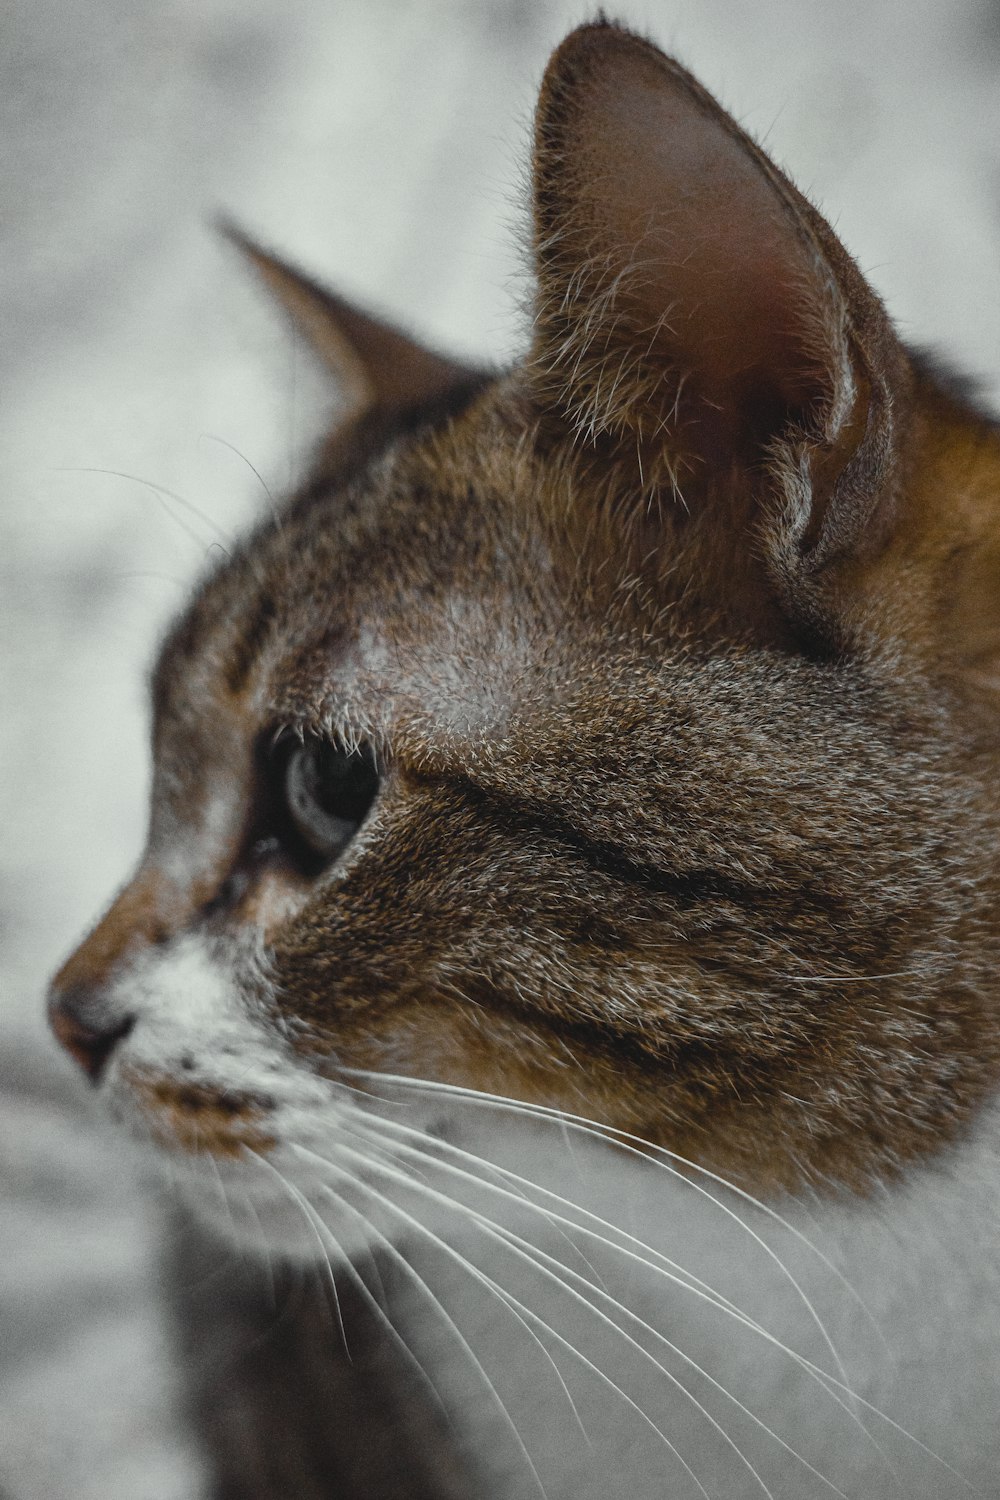 a close up of a cat's face with a blurry background